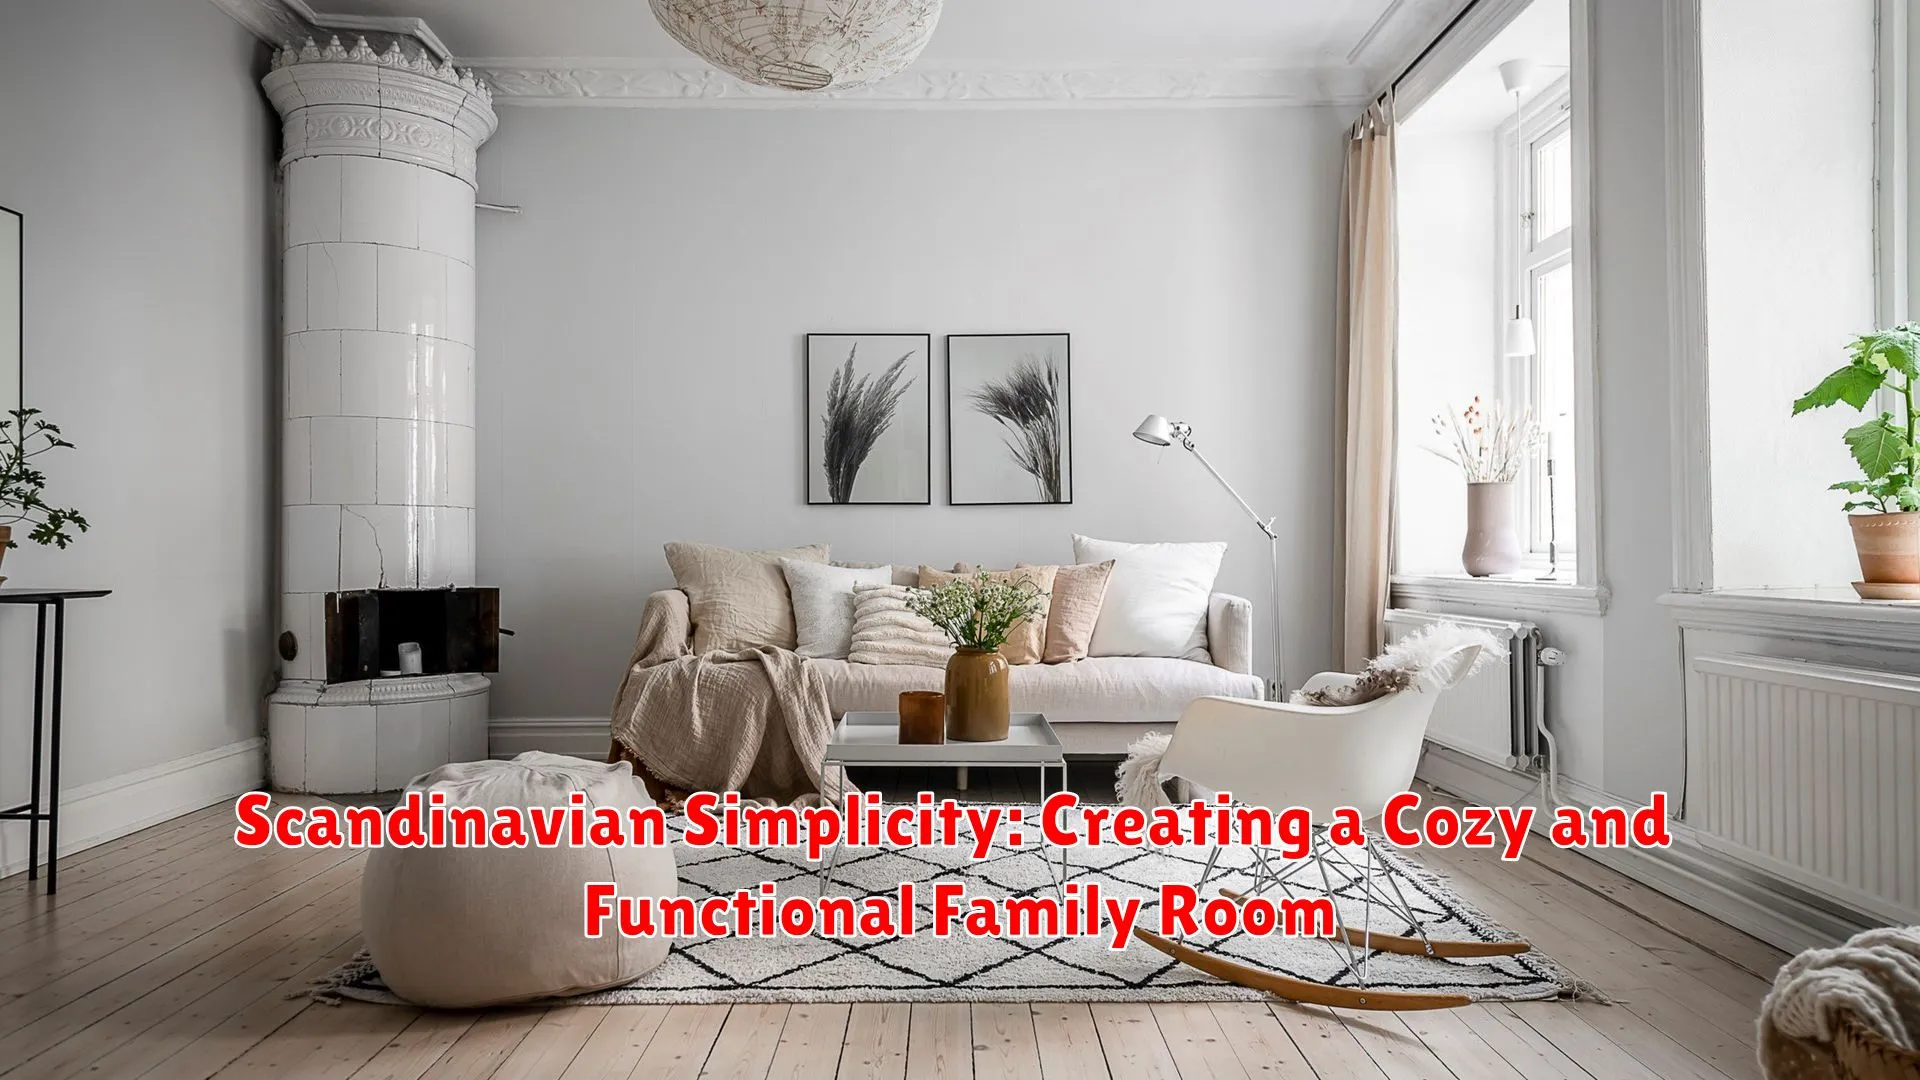 Scandinavian Simplicity: Creating a Cozy and Functional Family Room